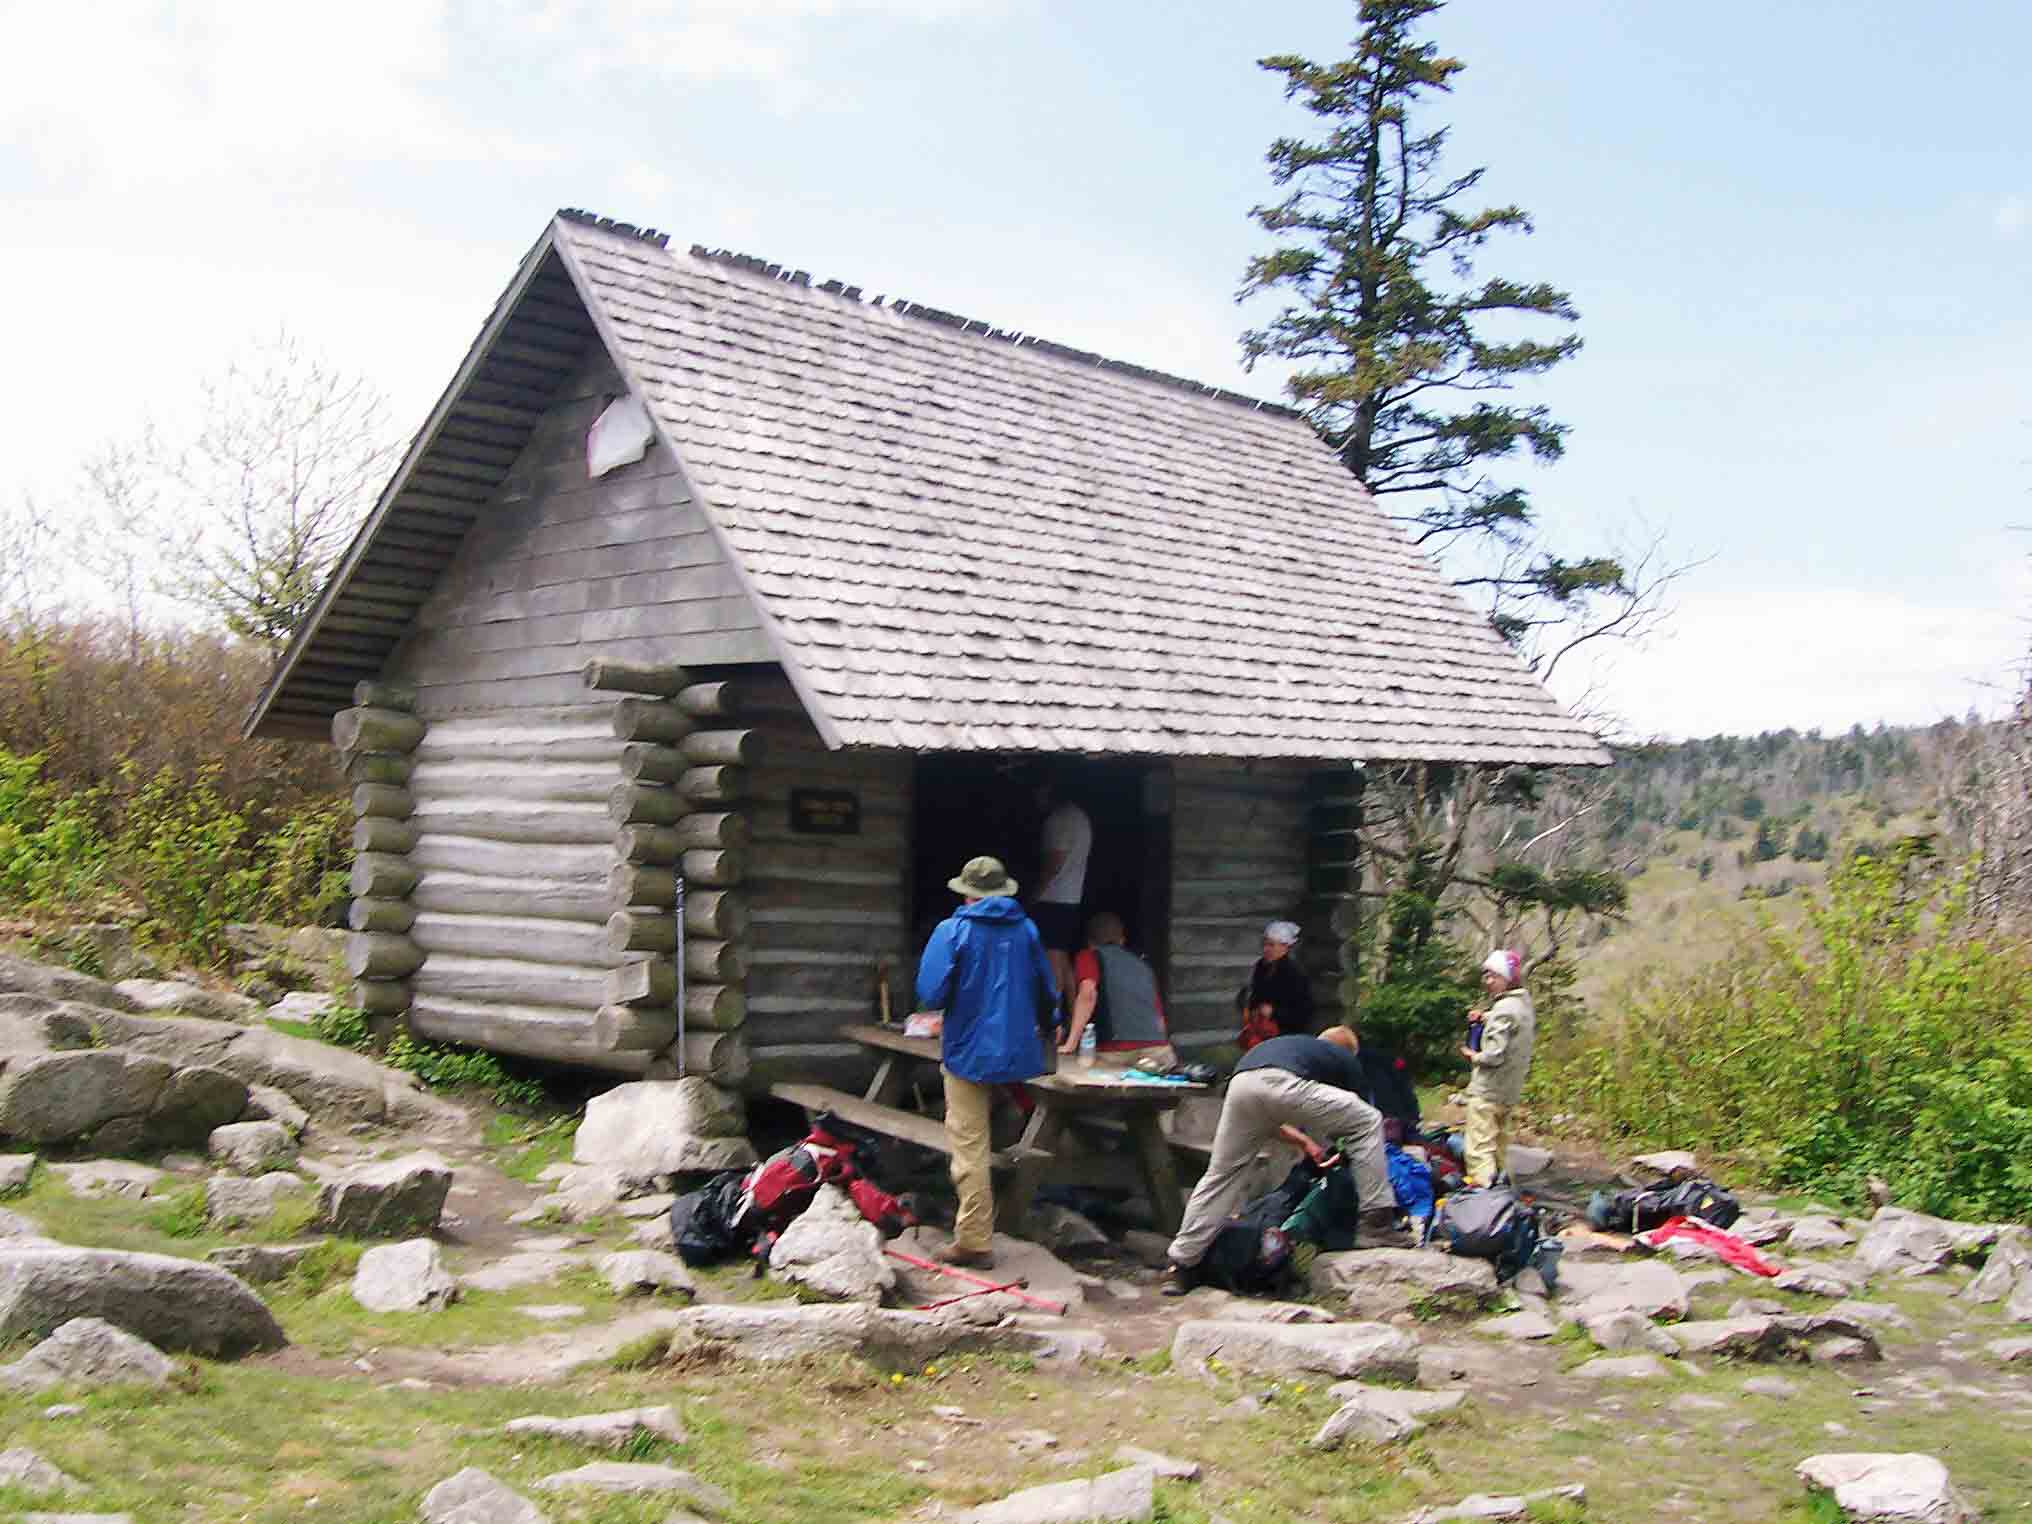 mm 12.7 - Thomas Knob Shelter in May 2006. Courtesy dlcul@conncoll.edu